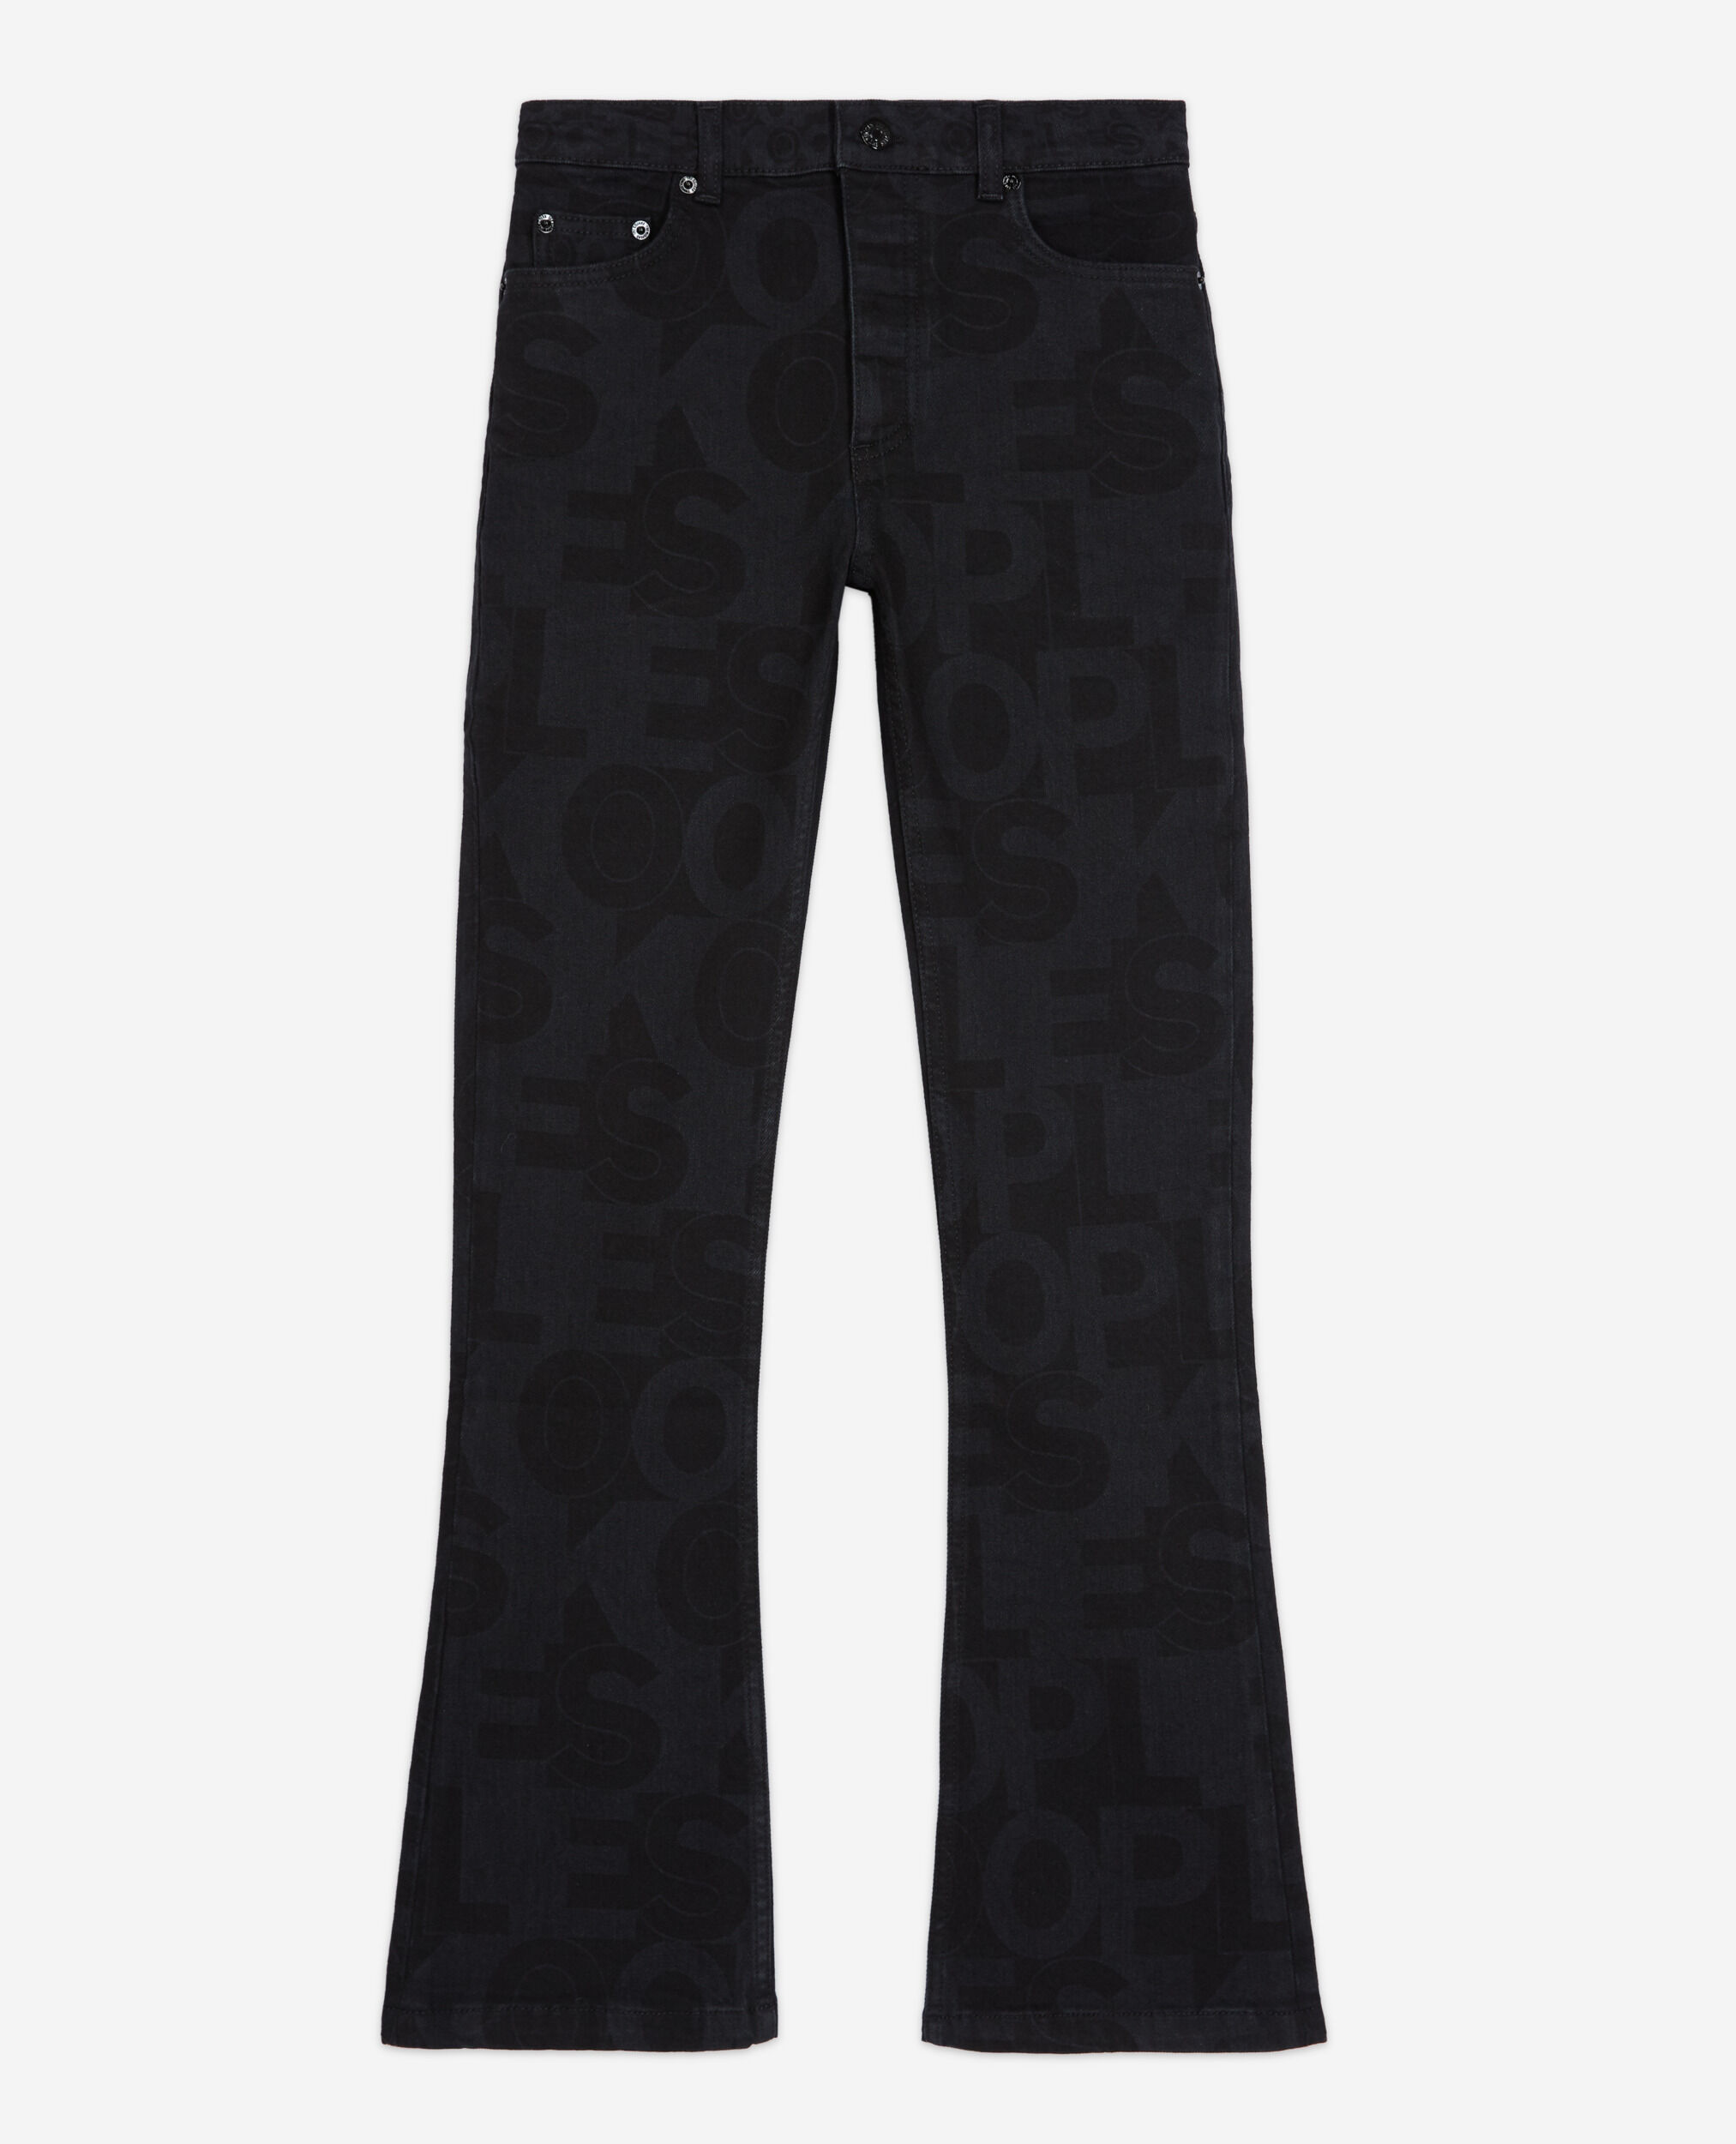 The Kooples jeans with logo, BLACK WASHED, hi-res image number null